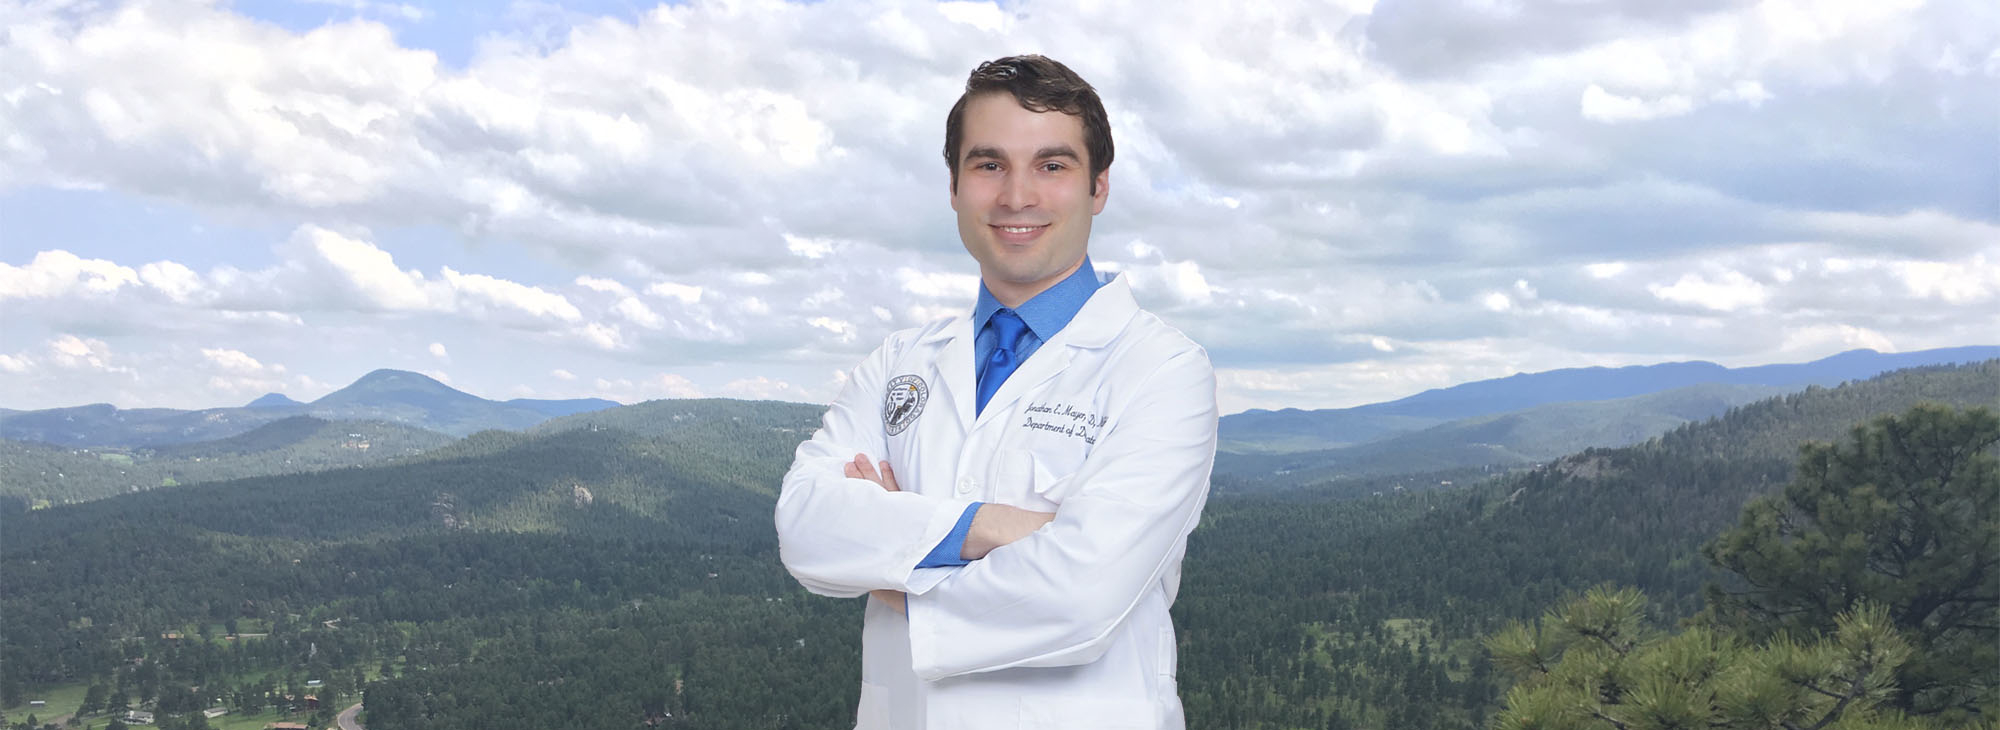 Dr. Mayer in front of mountains